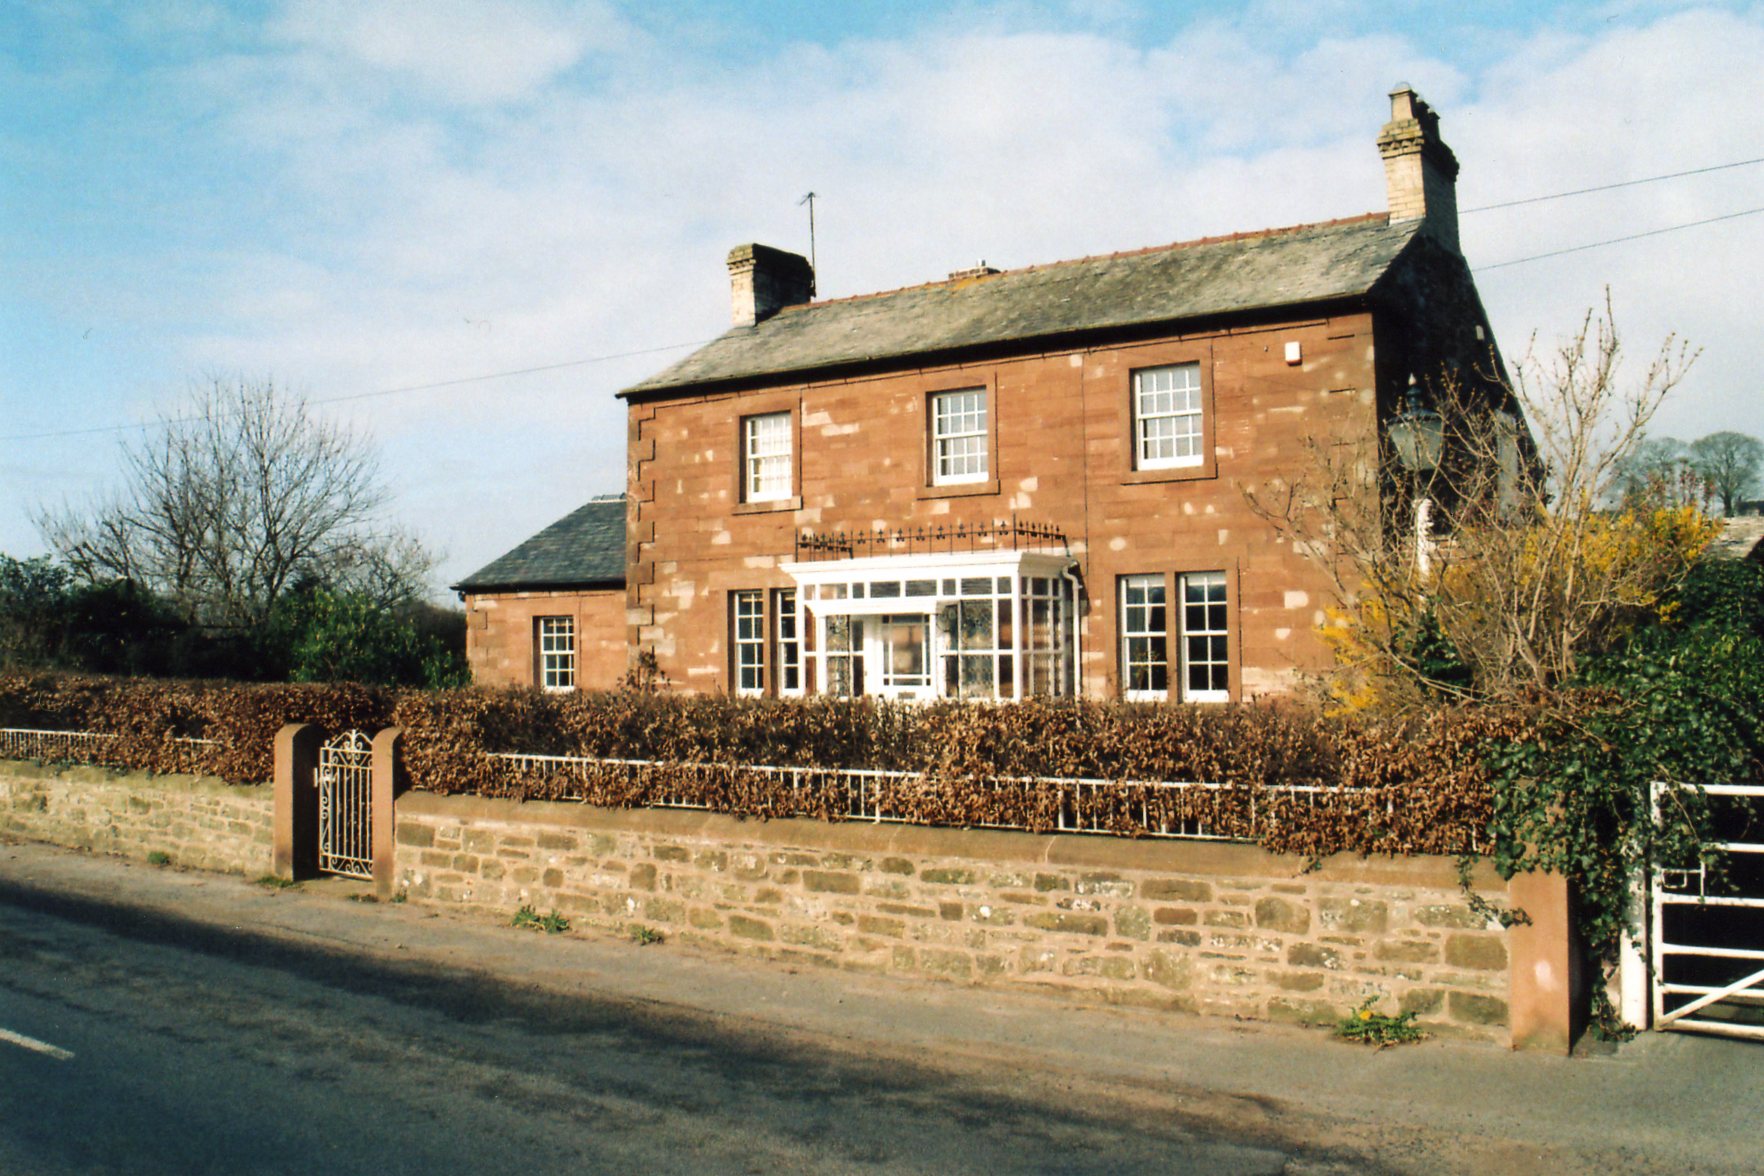 Holme House, Wetheral 2006